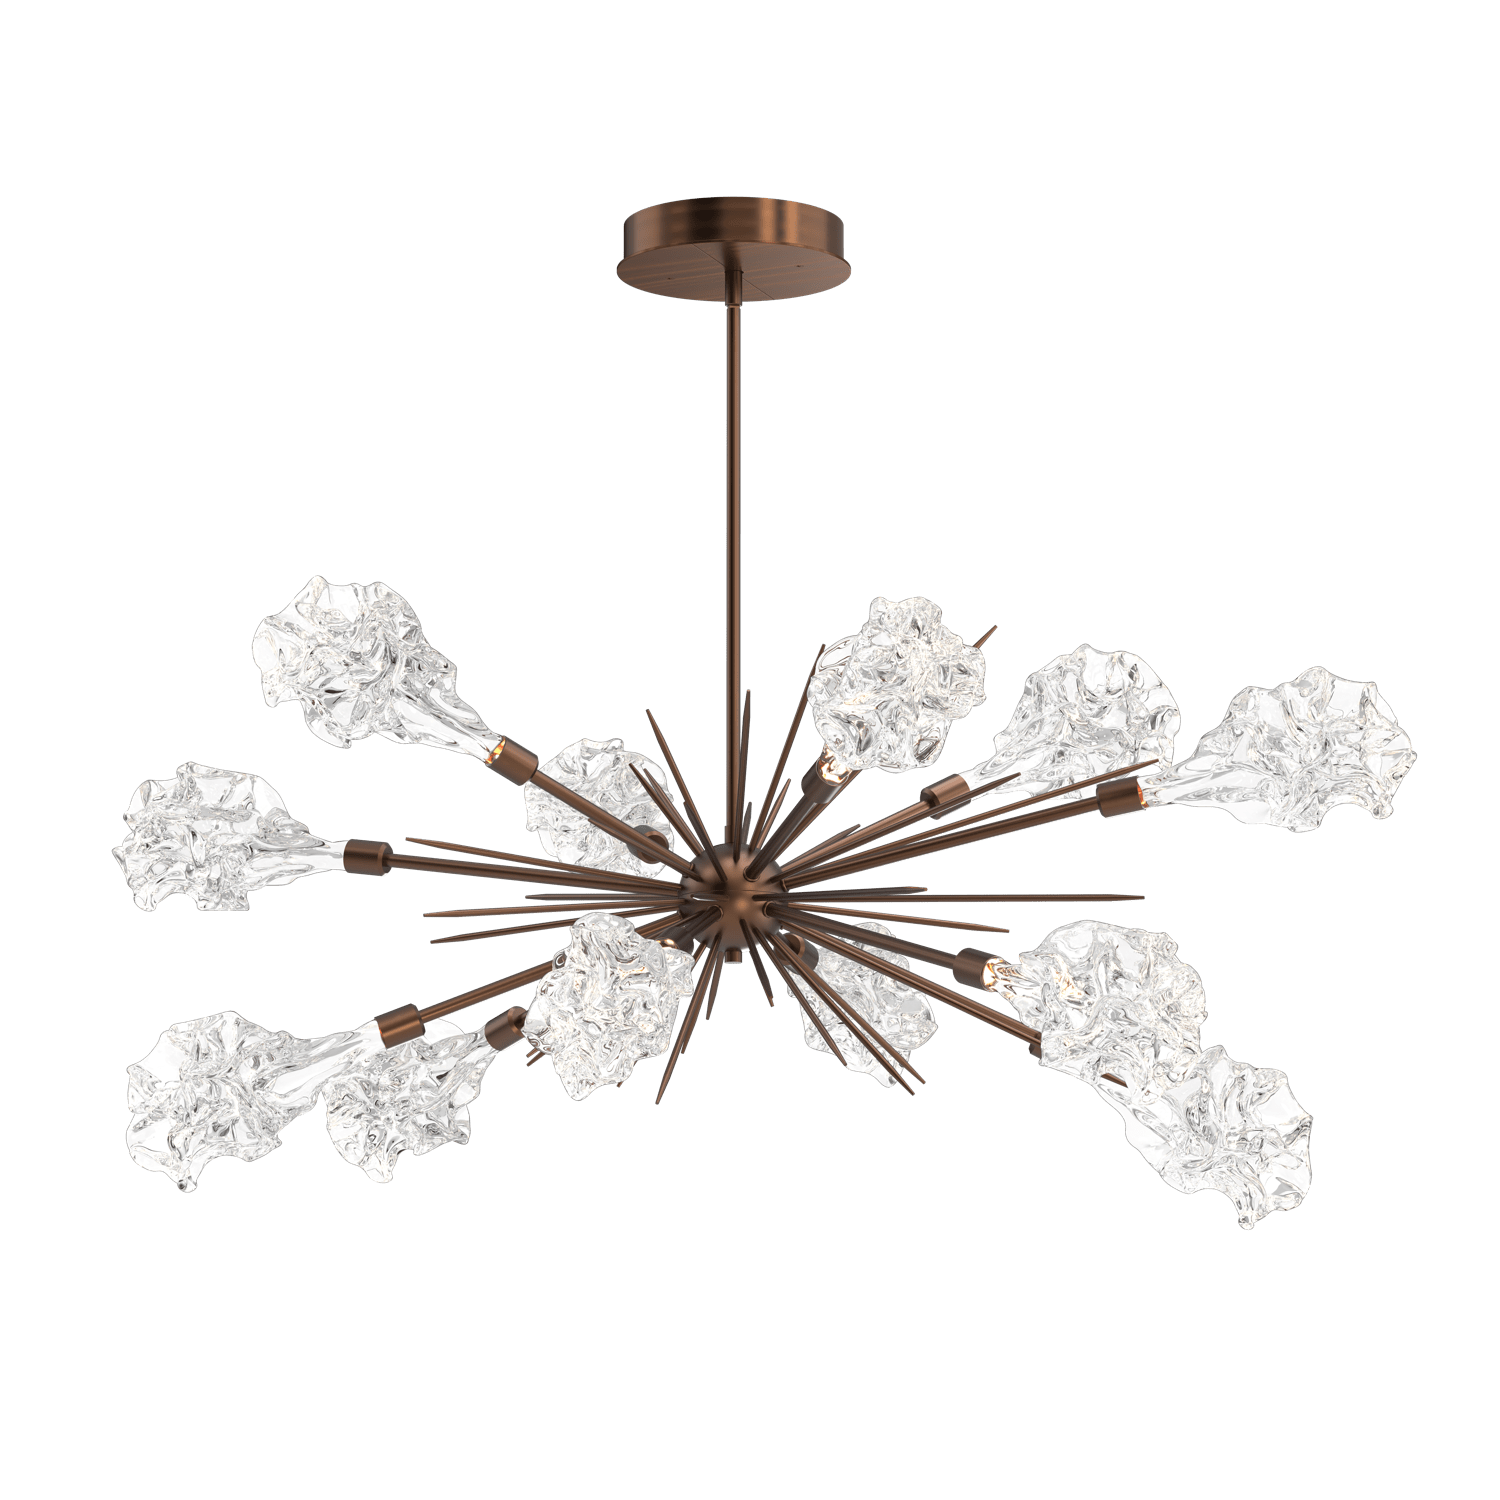 PLB0059-0A-RB-Hammerton-Studio-Blossom-47-inch-oval-starburst-chandelier-with-oil-rubbed-bronze-finish-and-clear-handblown-crystal-glass-shades-and-LED-lamping